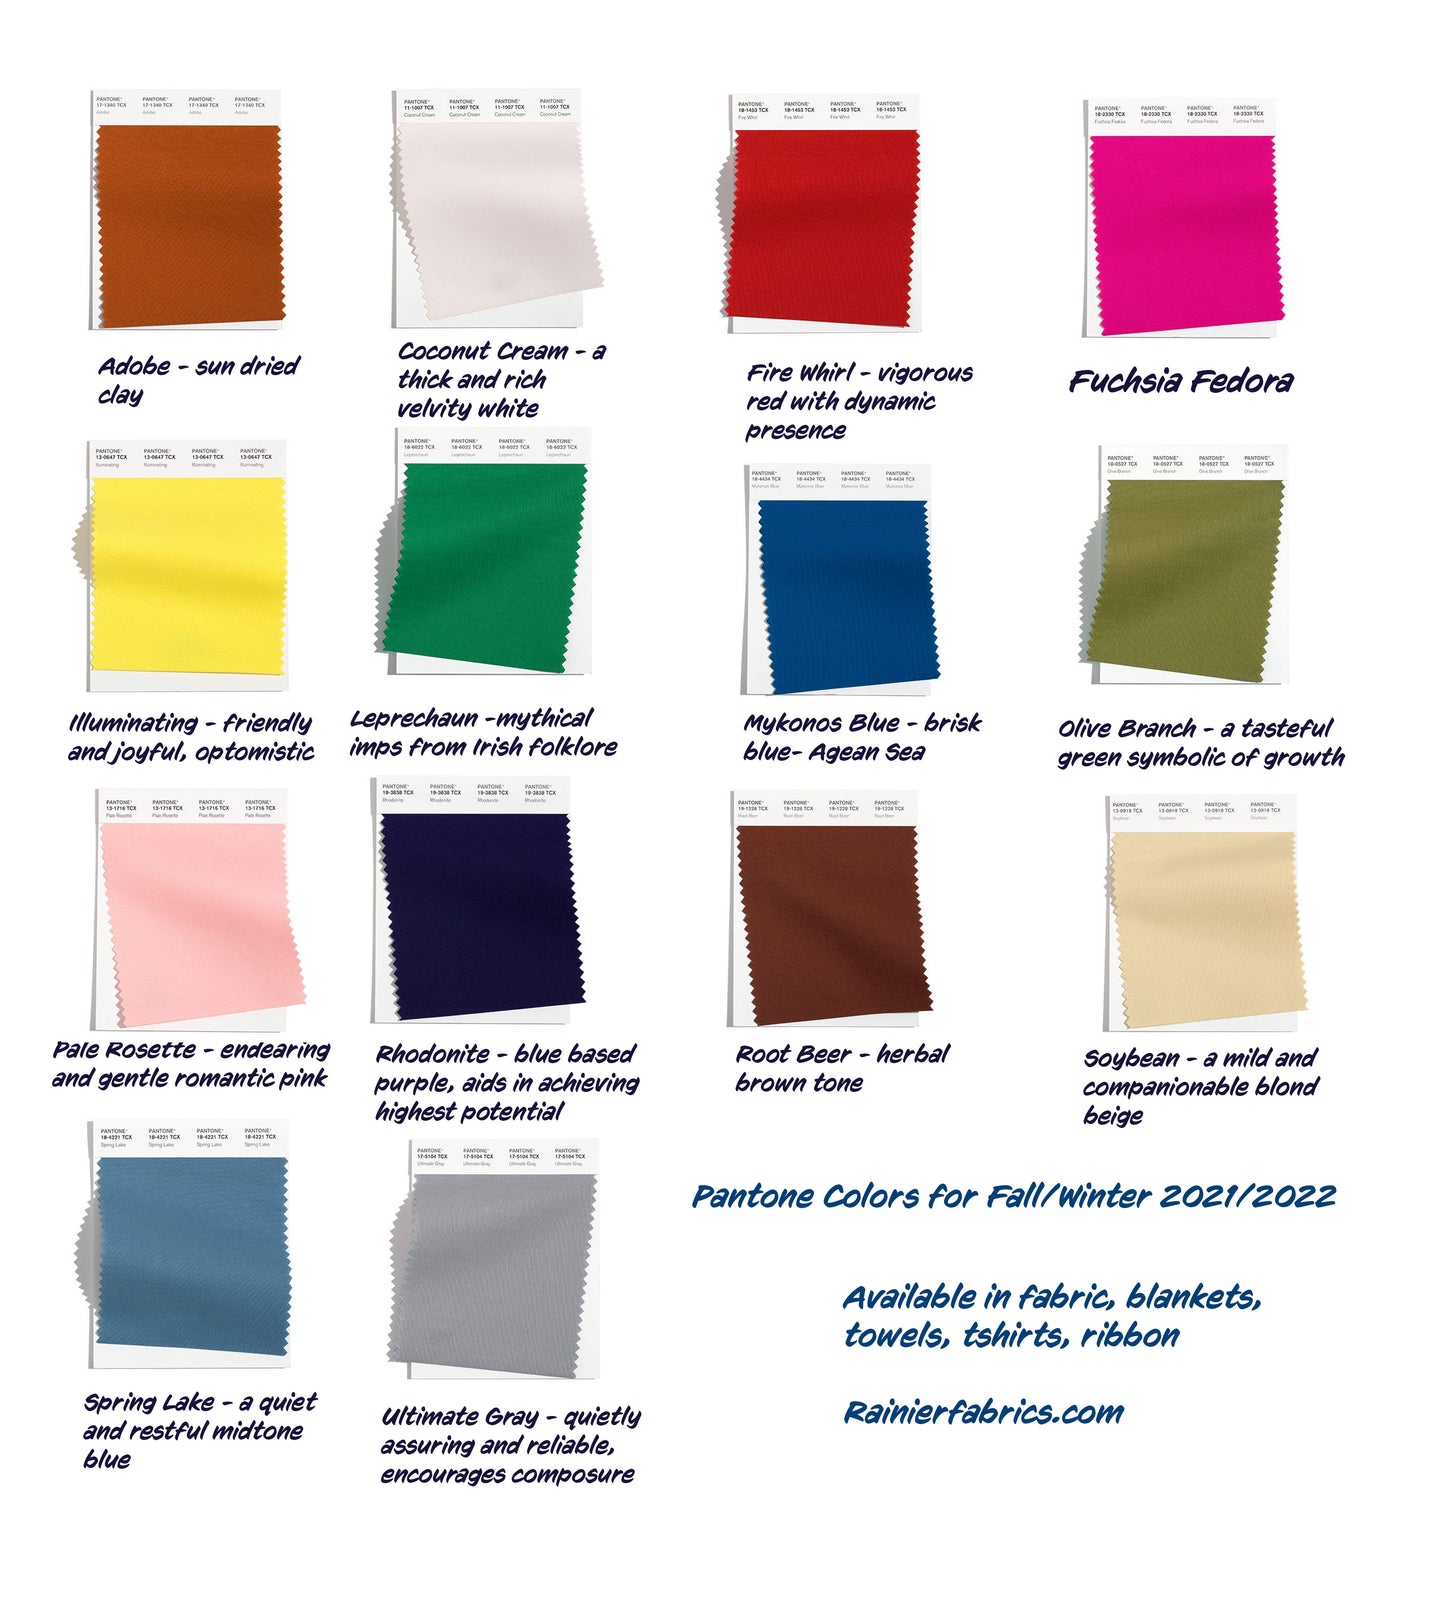 Pantone Colors for Fall/Winter 2021/2022 Solids - 2-5 day turnaround - Order by 1/2 yard; Description of bases below